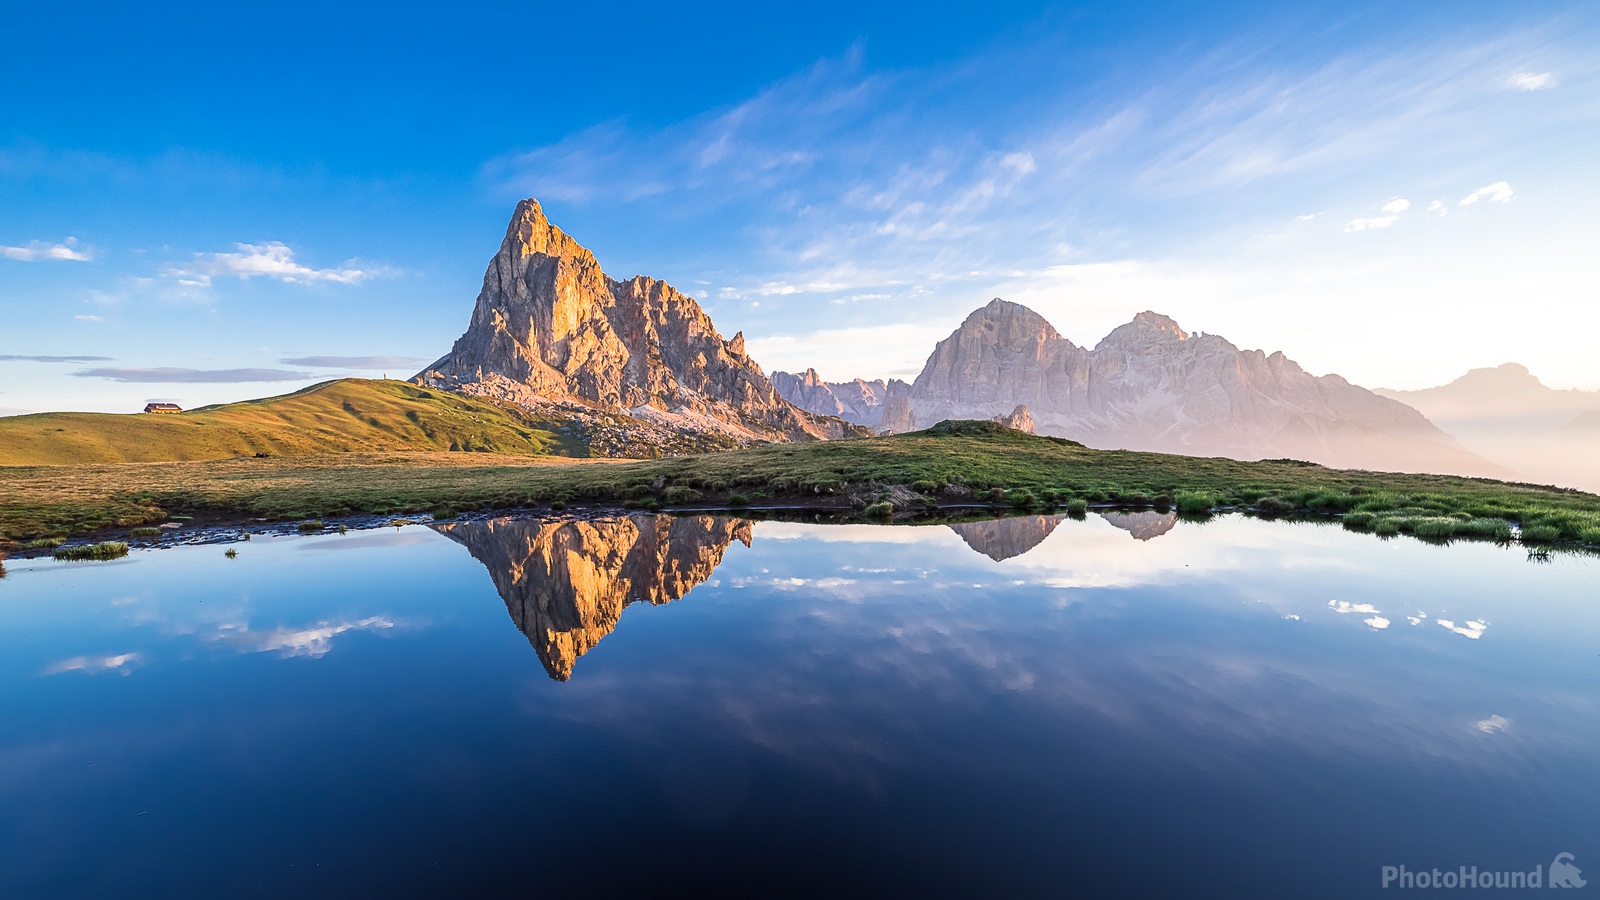 Image of Passo Giau - Pond Reflections by alberto Adami